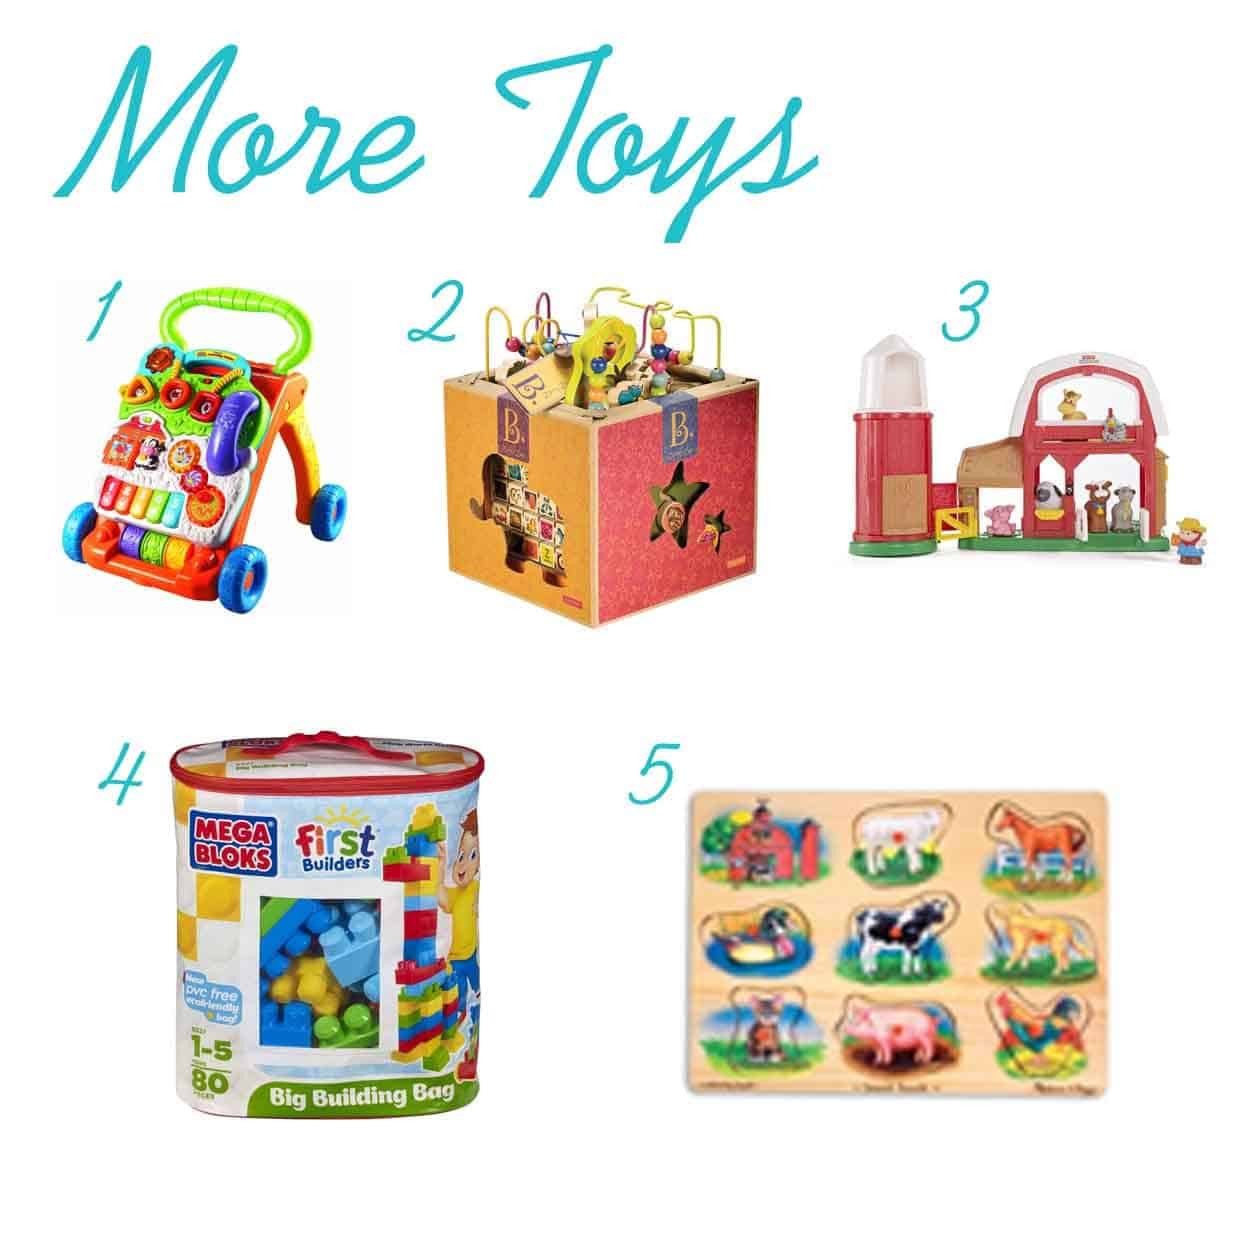 1 Yr Old Boy Birthday Gift Ideas
 The Ultimate Gift List for a 1 Year Old Boy • The Pinning